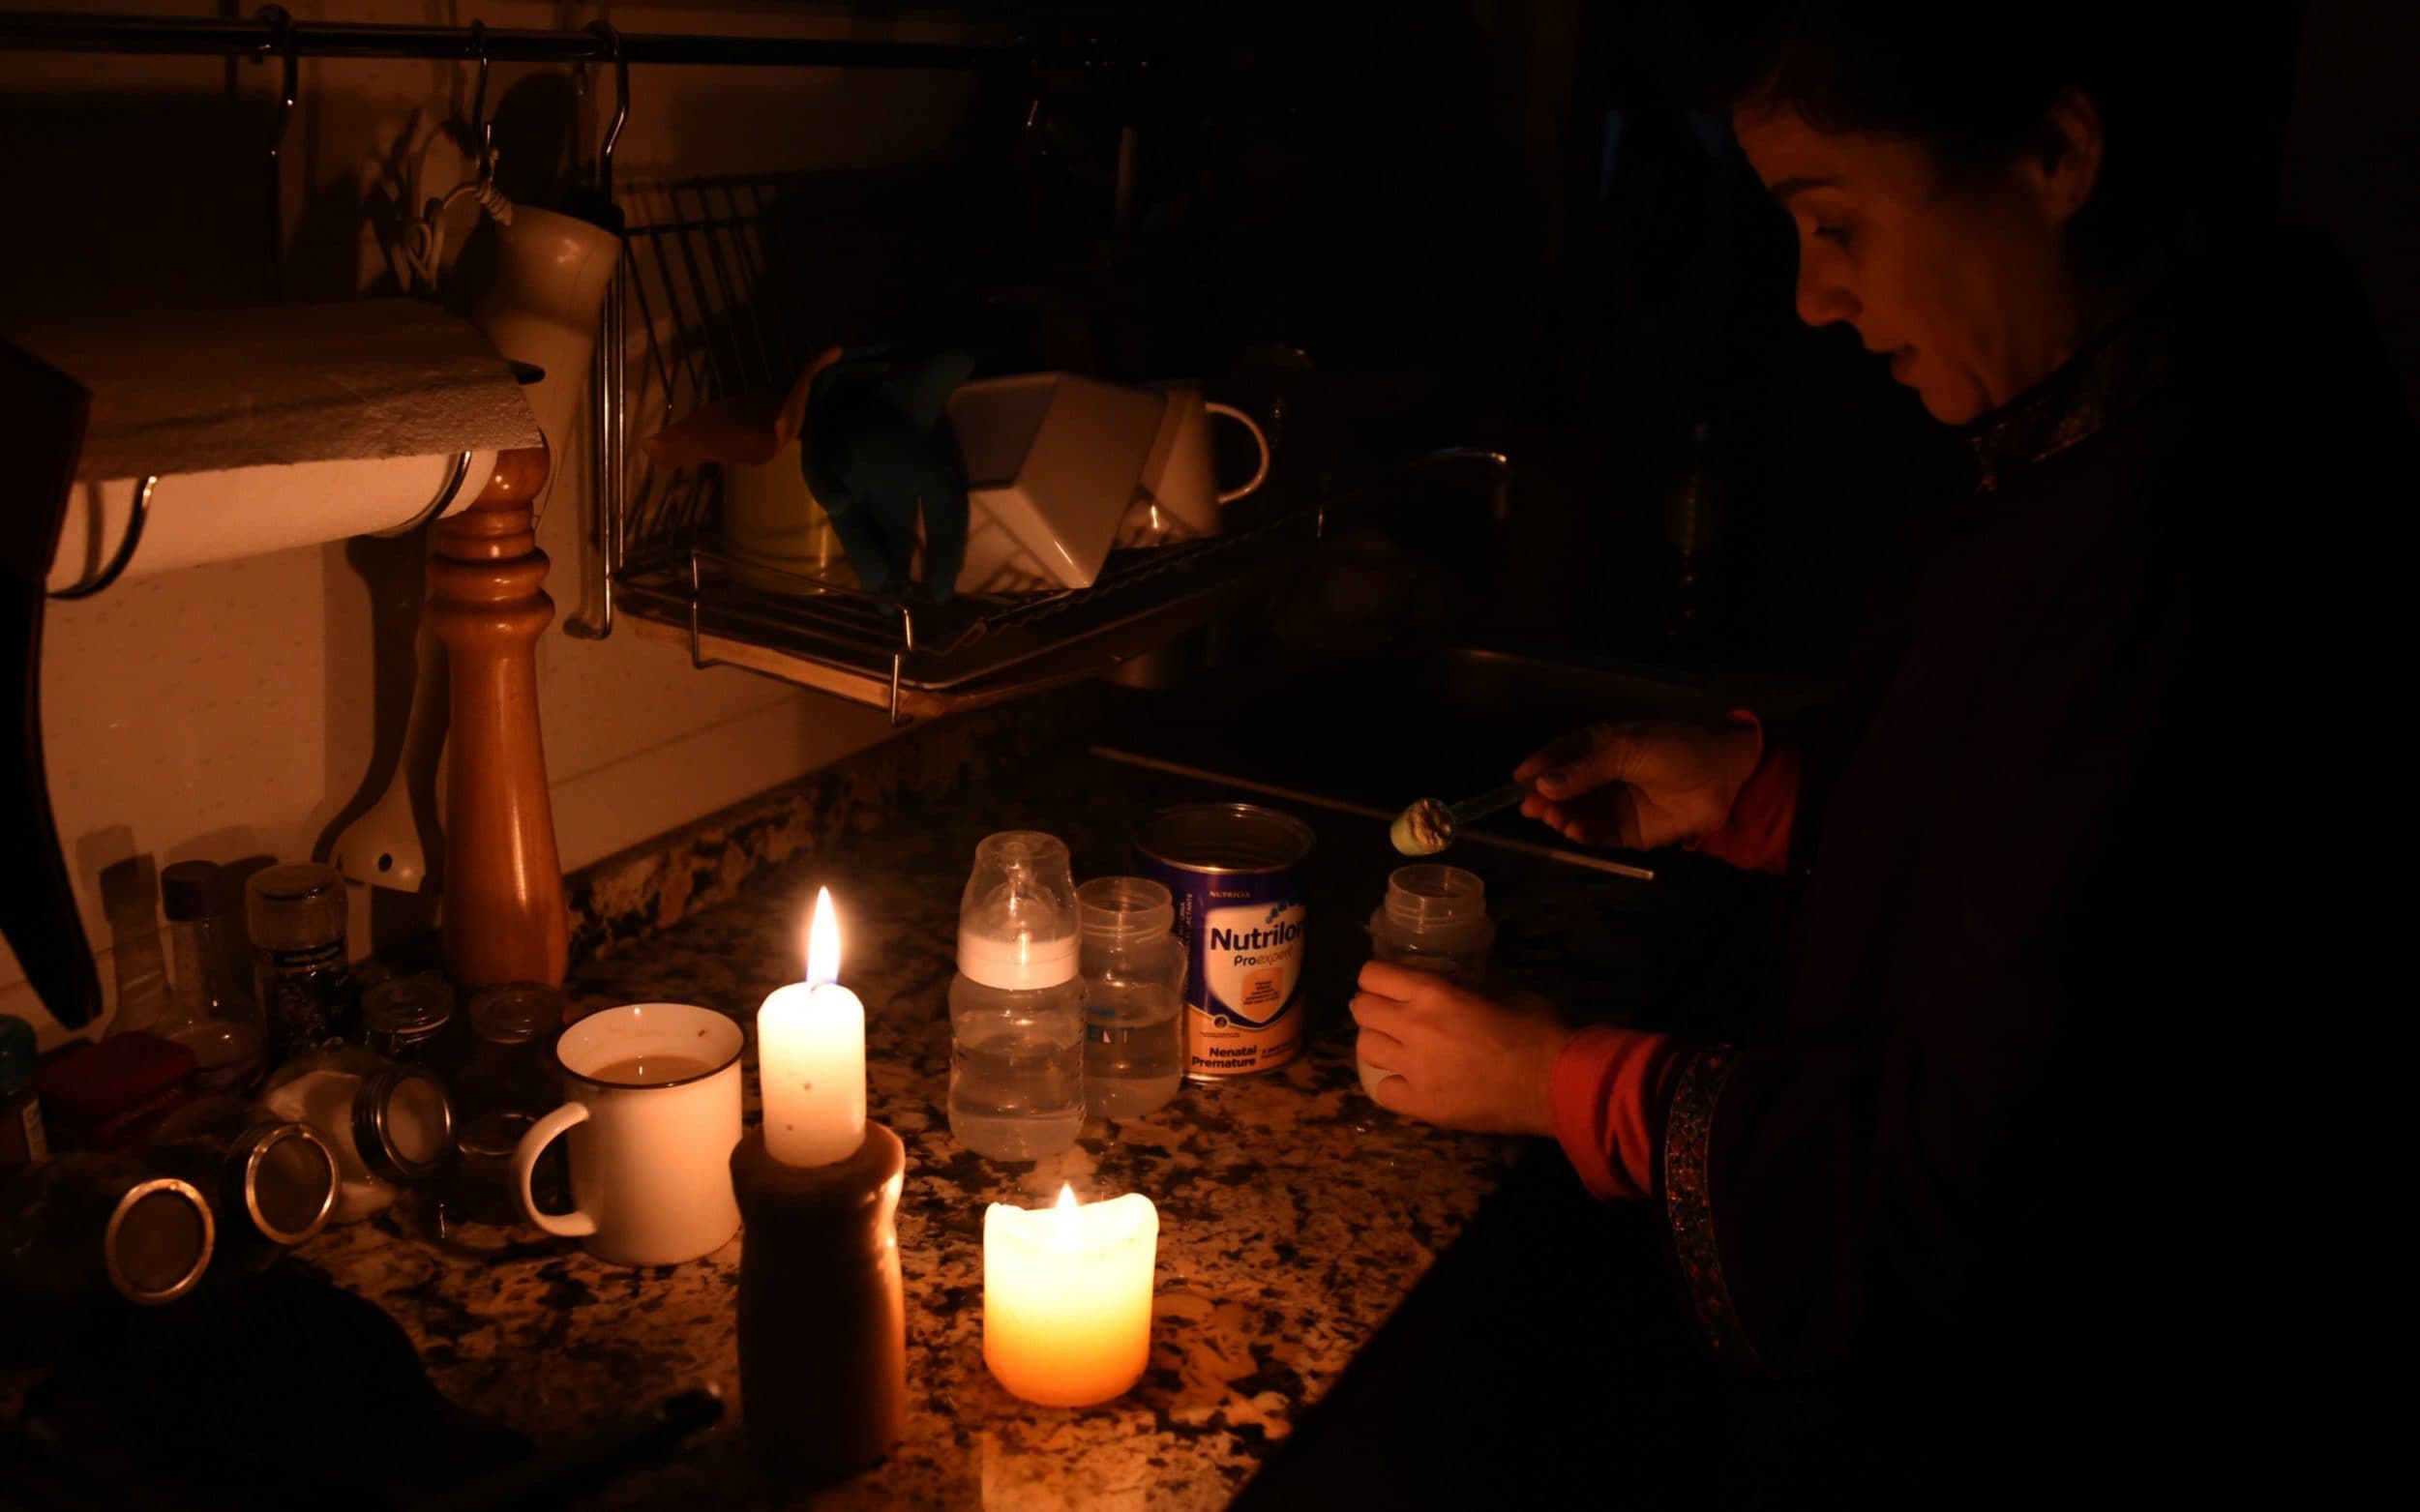 Jammu and Kashmir Experiences 25% Surge in Unexpected Power Outages